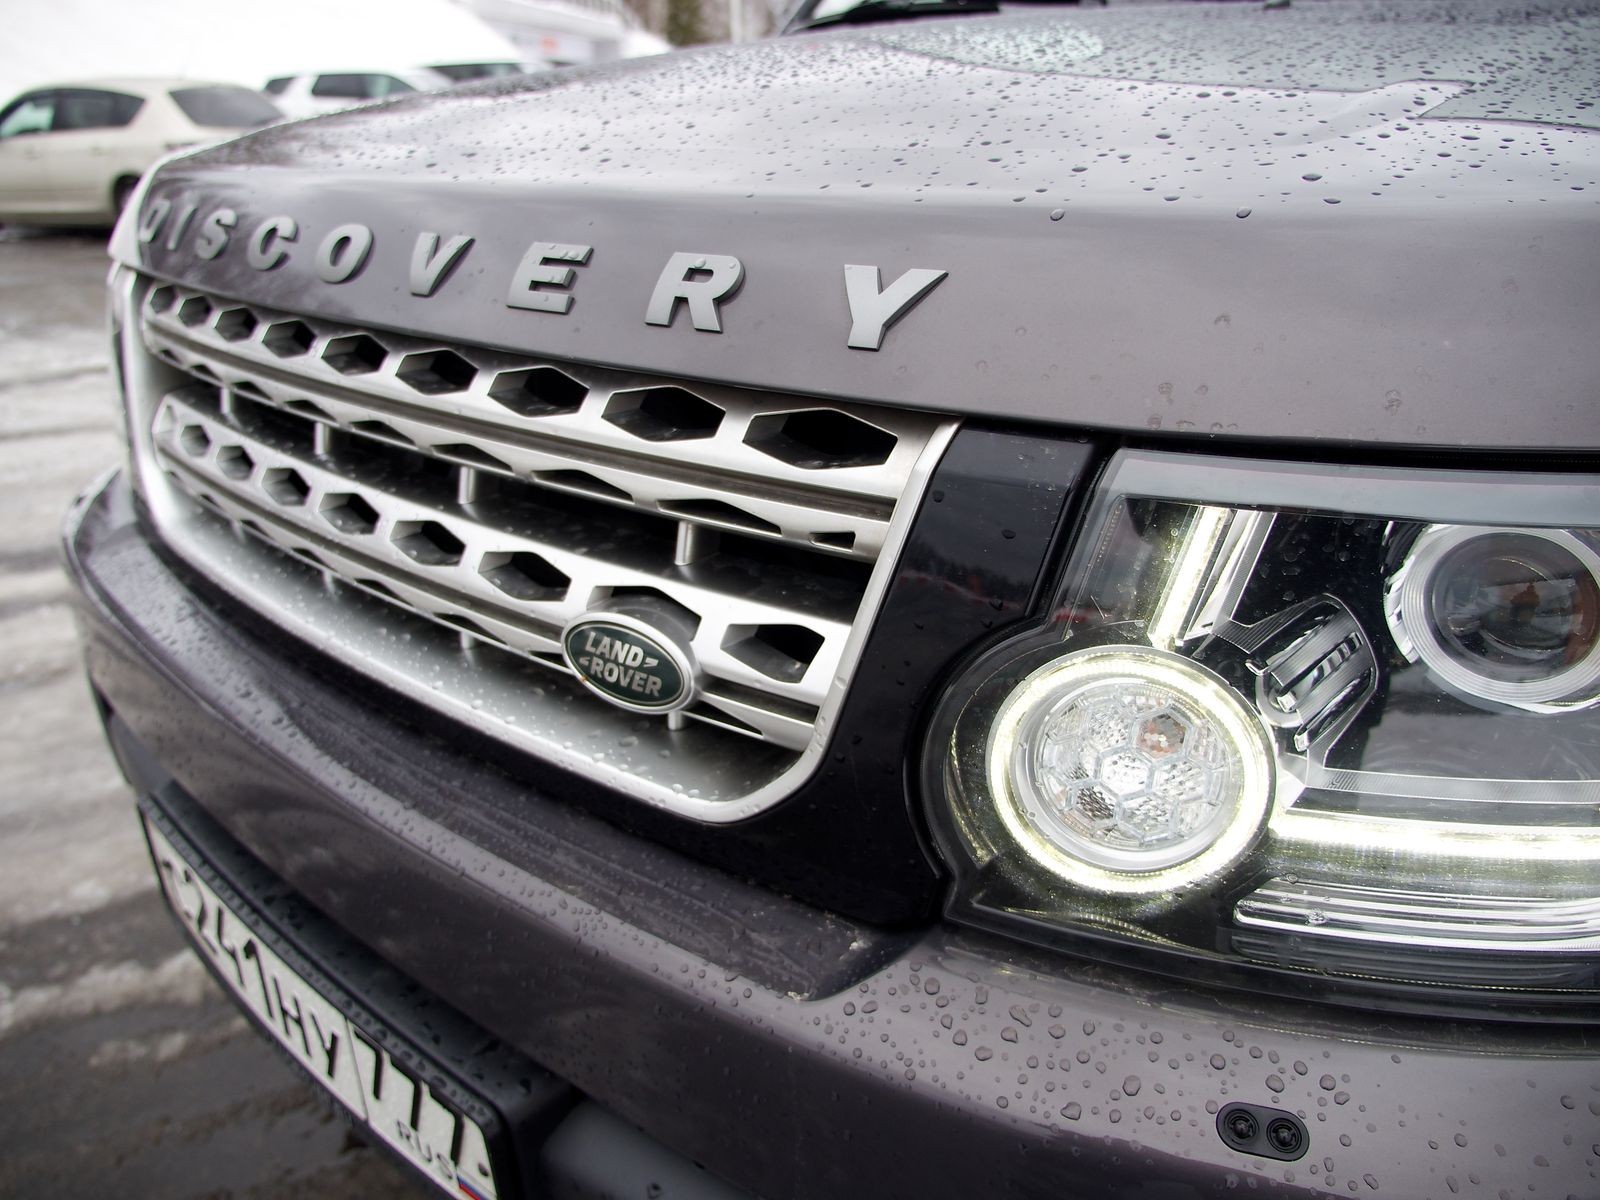 lr discovery 63 result